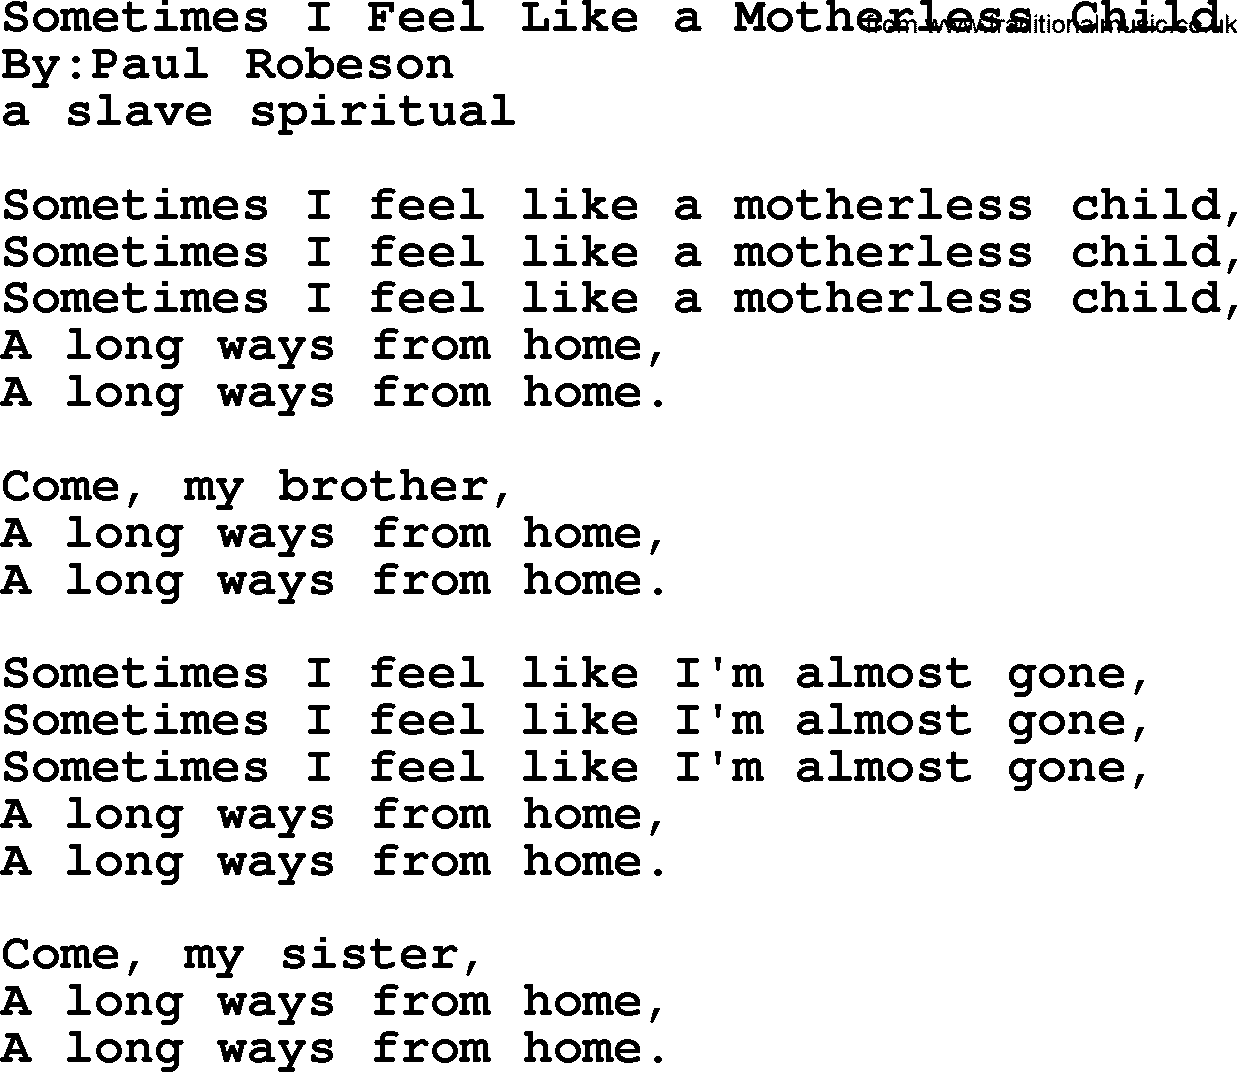 Political, Solidarity, Workers or Union song: Sometimes I Feel Like A Motherless Child, lyrics